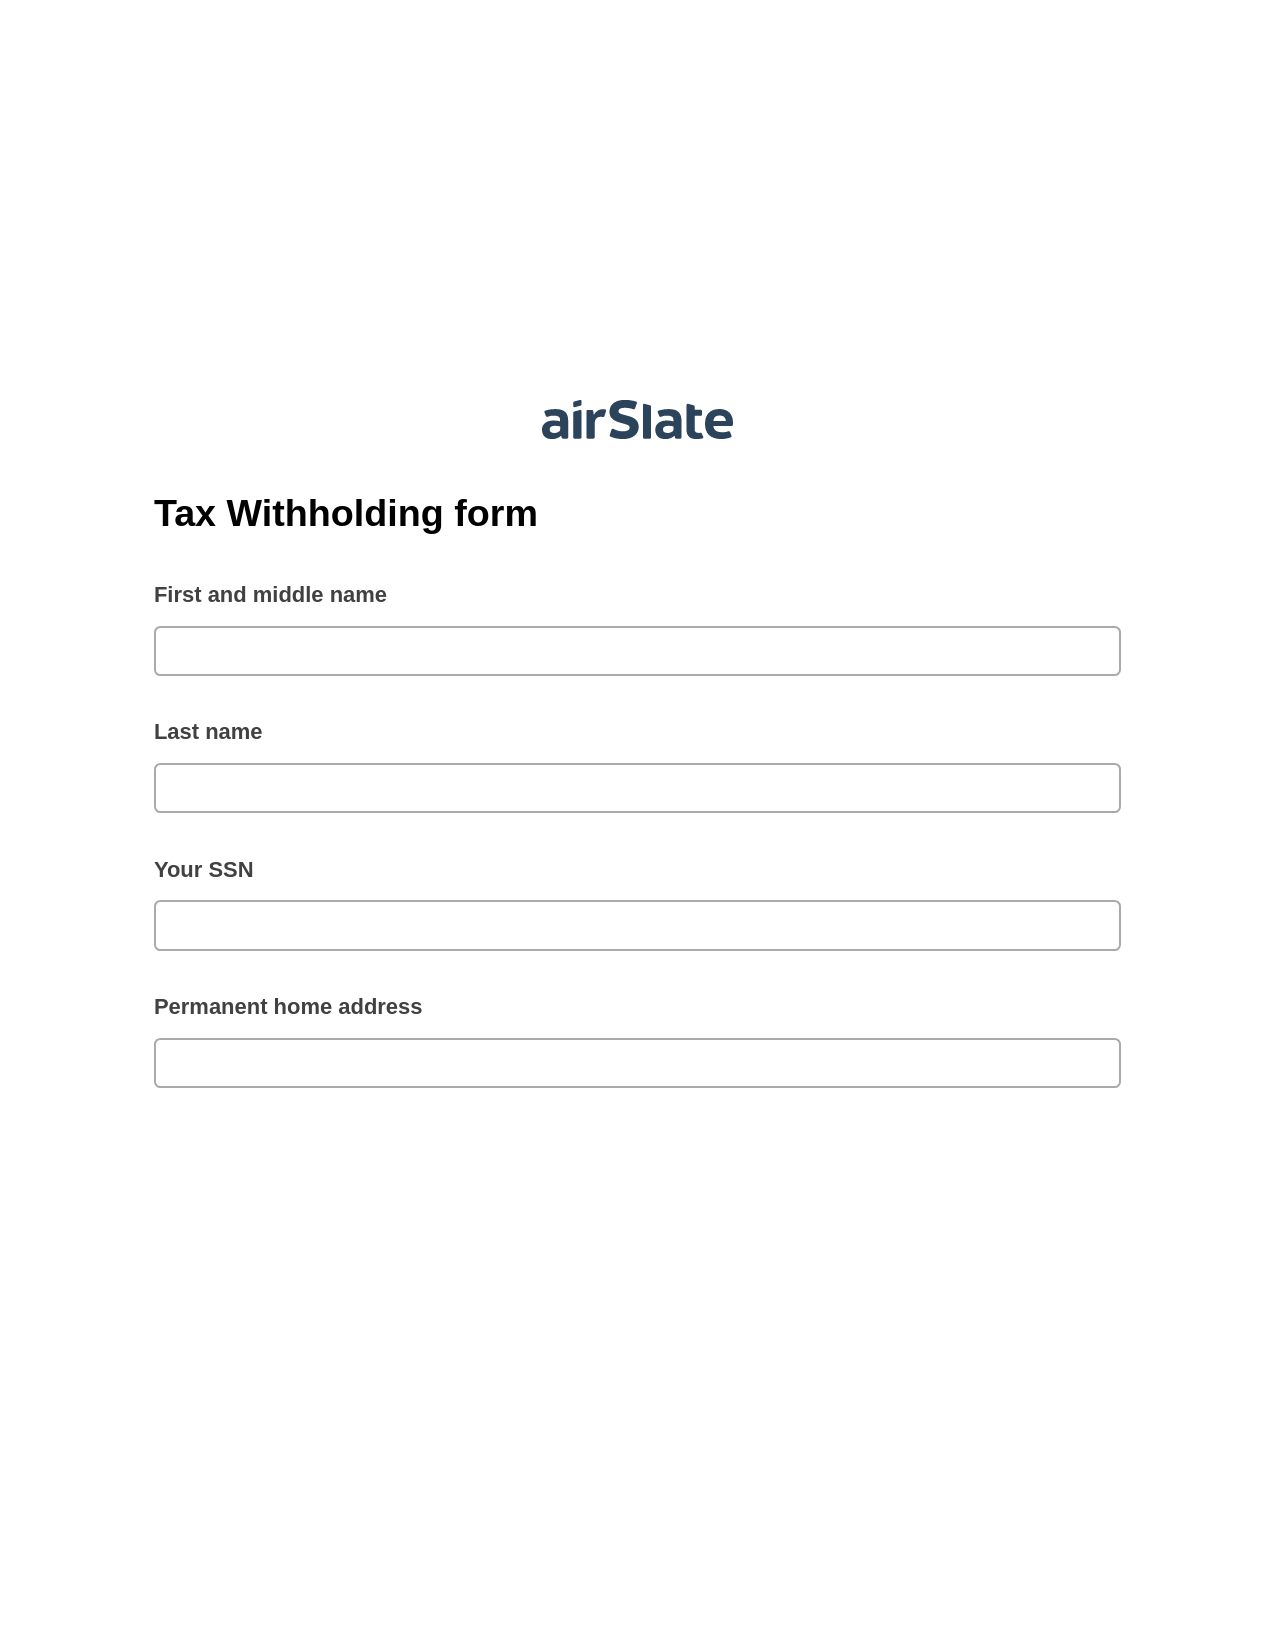 Multirole Tax Withholding form Pre-fill from NetSuite Records Bot, Webhook Bot, Webhook Postfinish Bot